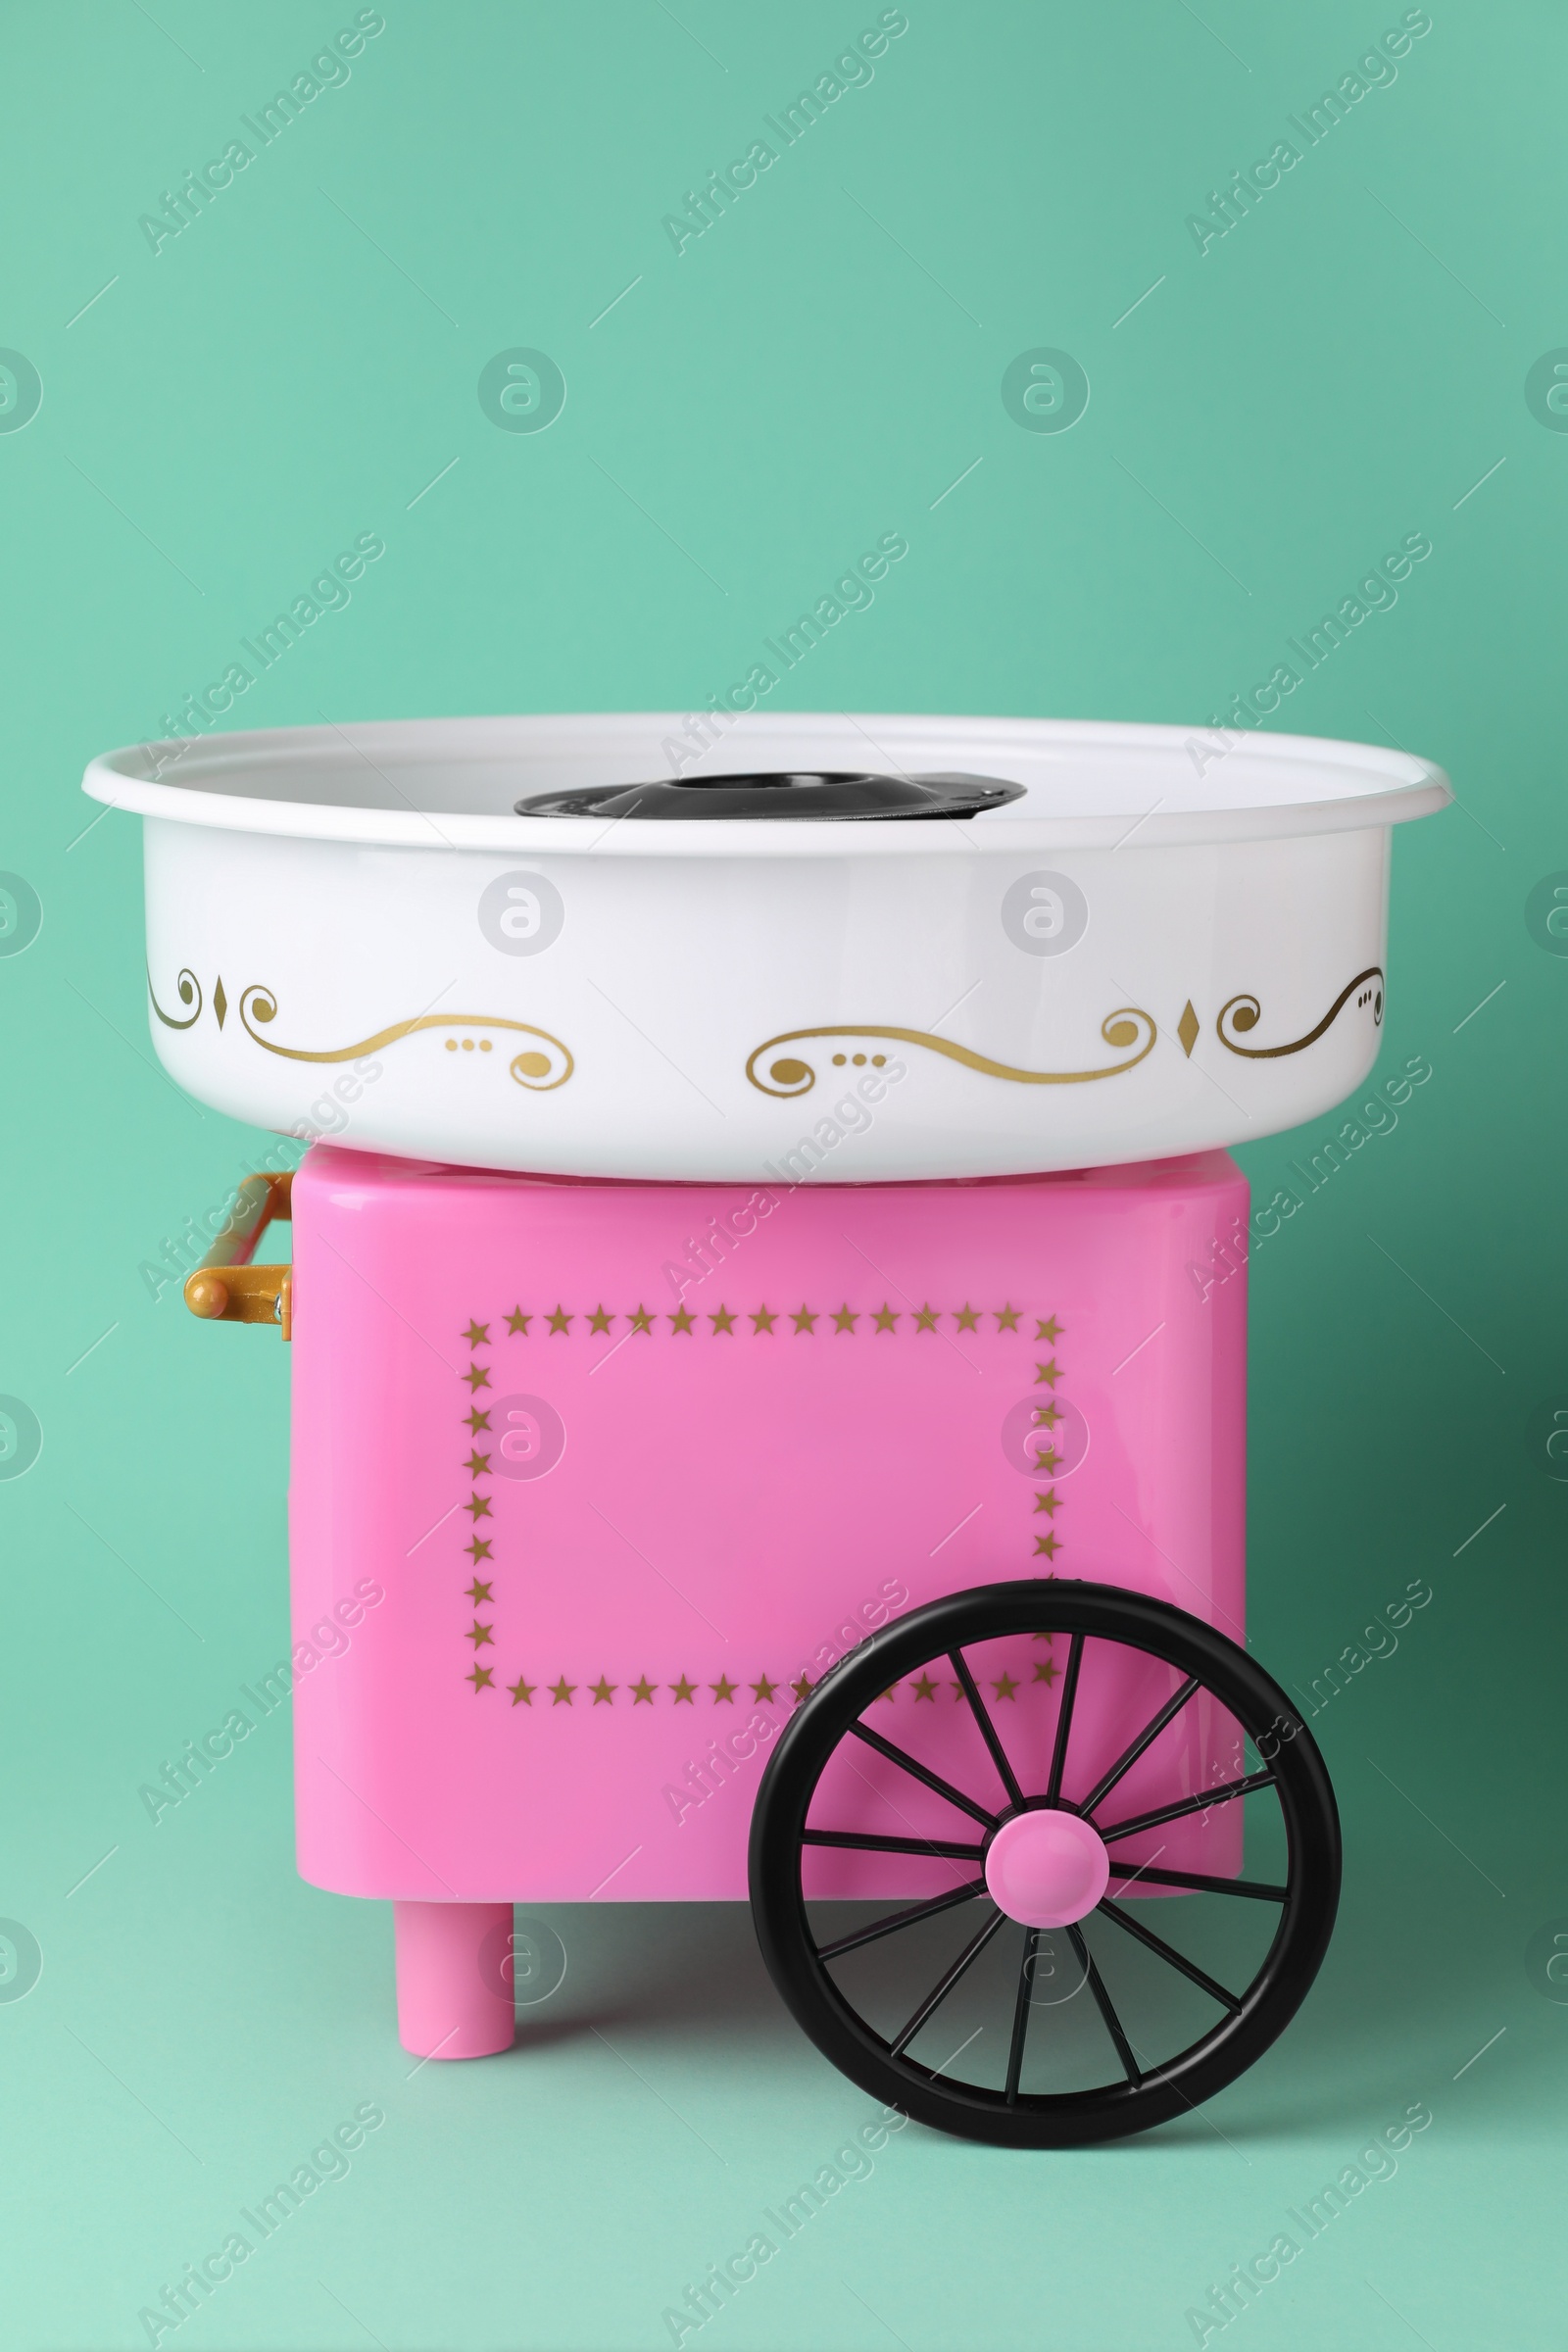 Photo of Portable candy cotton machine on turquoise background